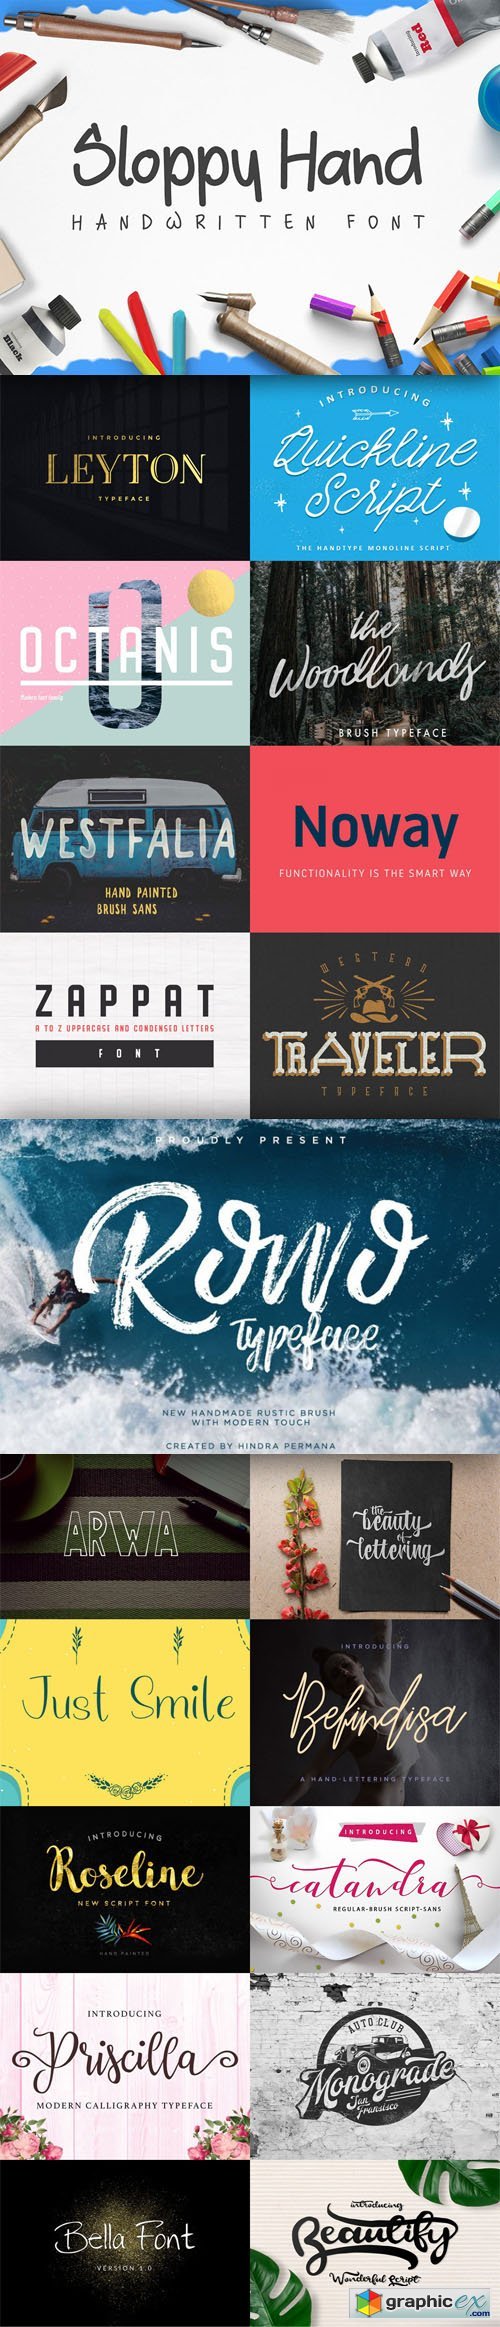 20 Sophisticated Fonts Collection For Designers